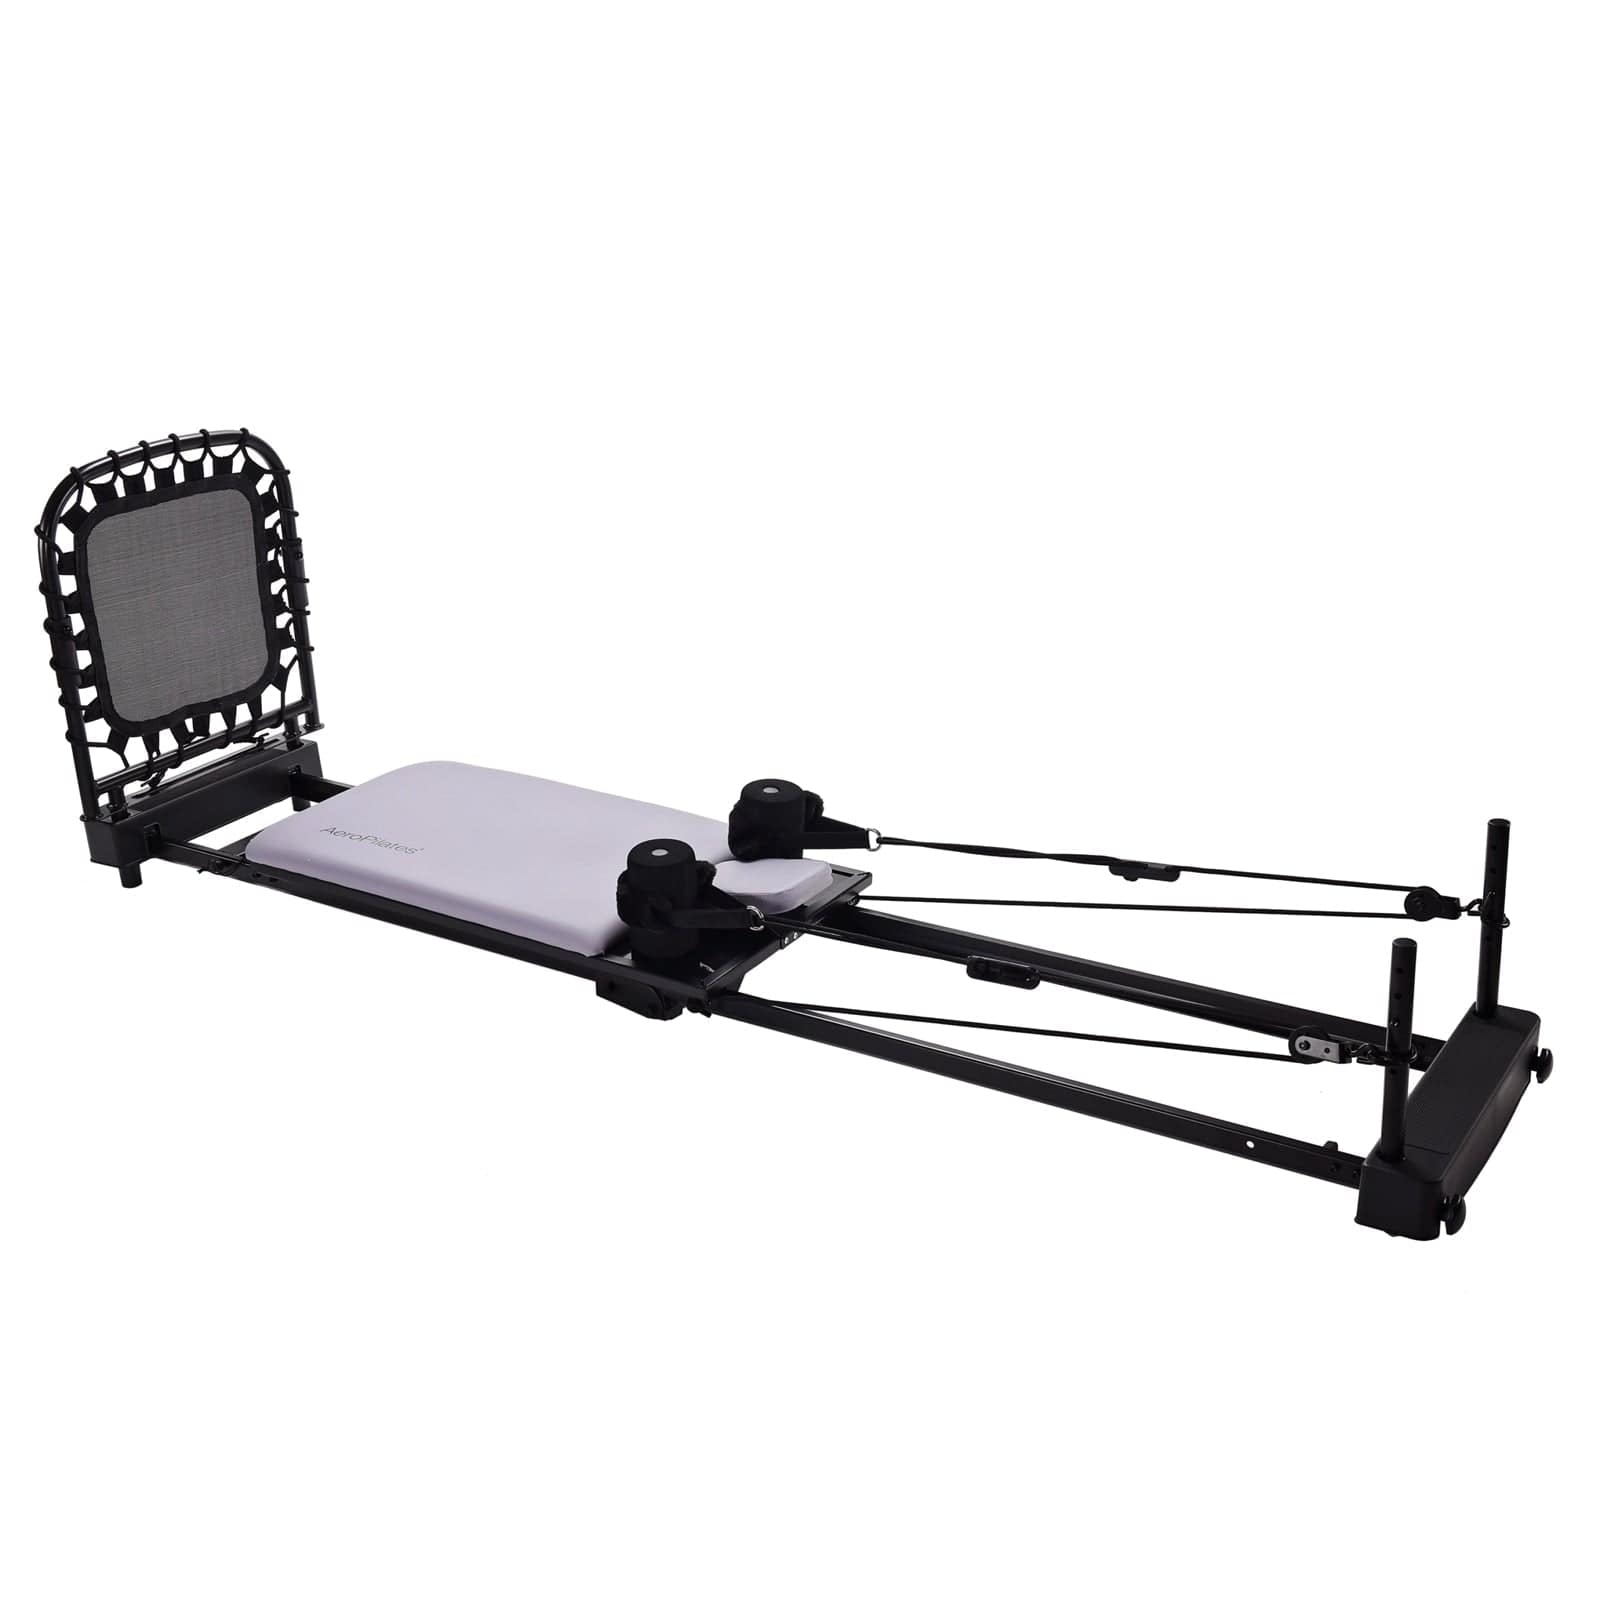 Stamina Products Large Riser Stand For Aeropilates Reformer